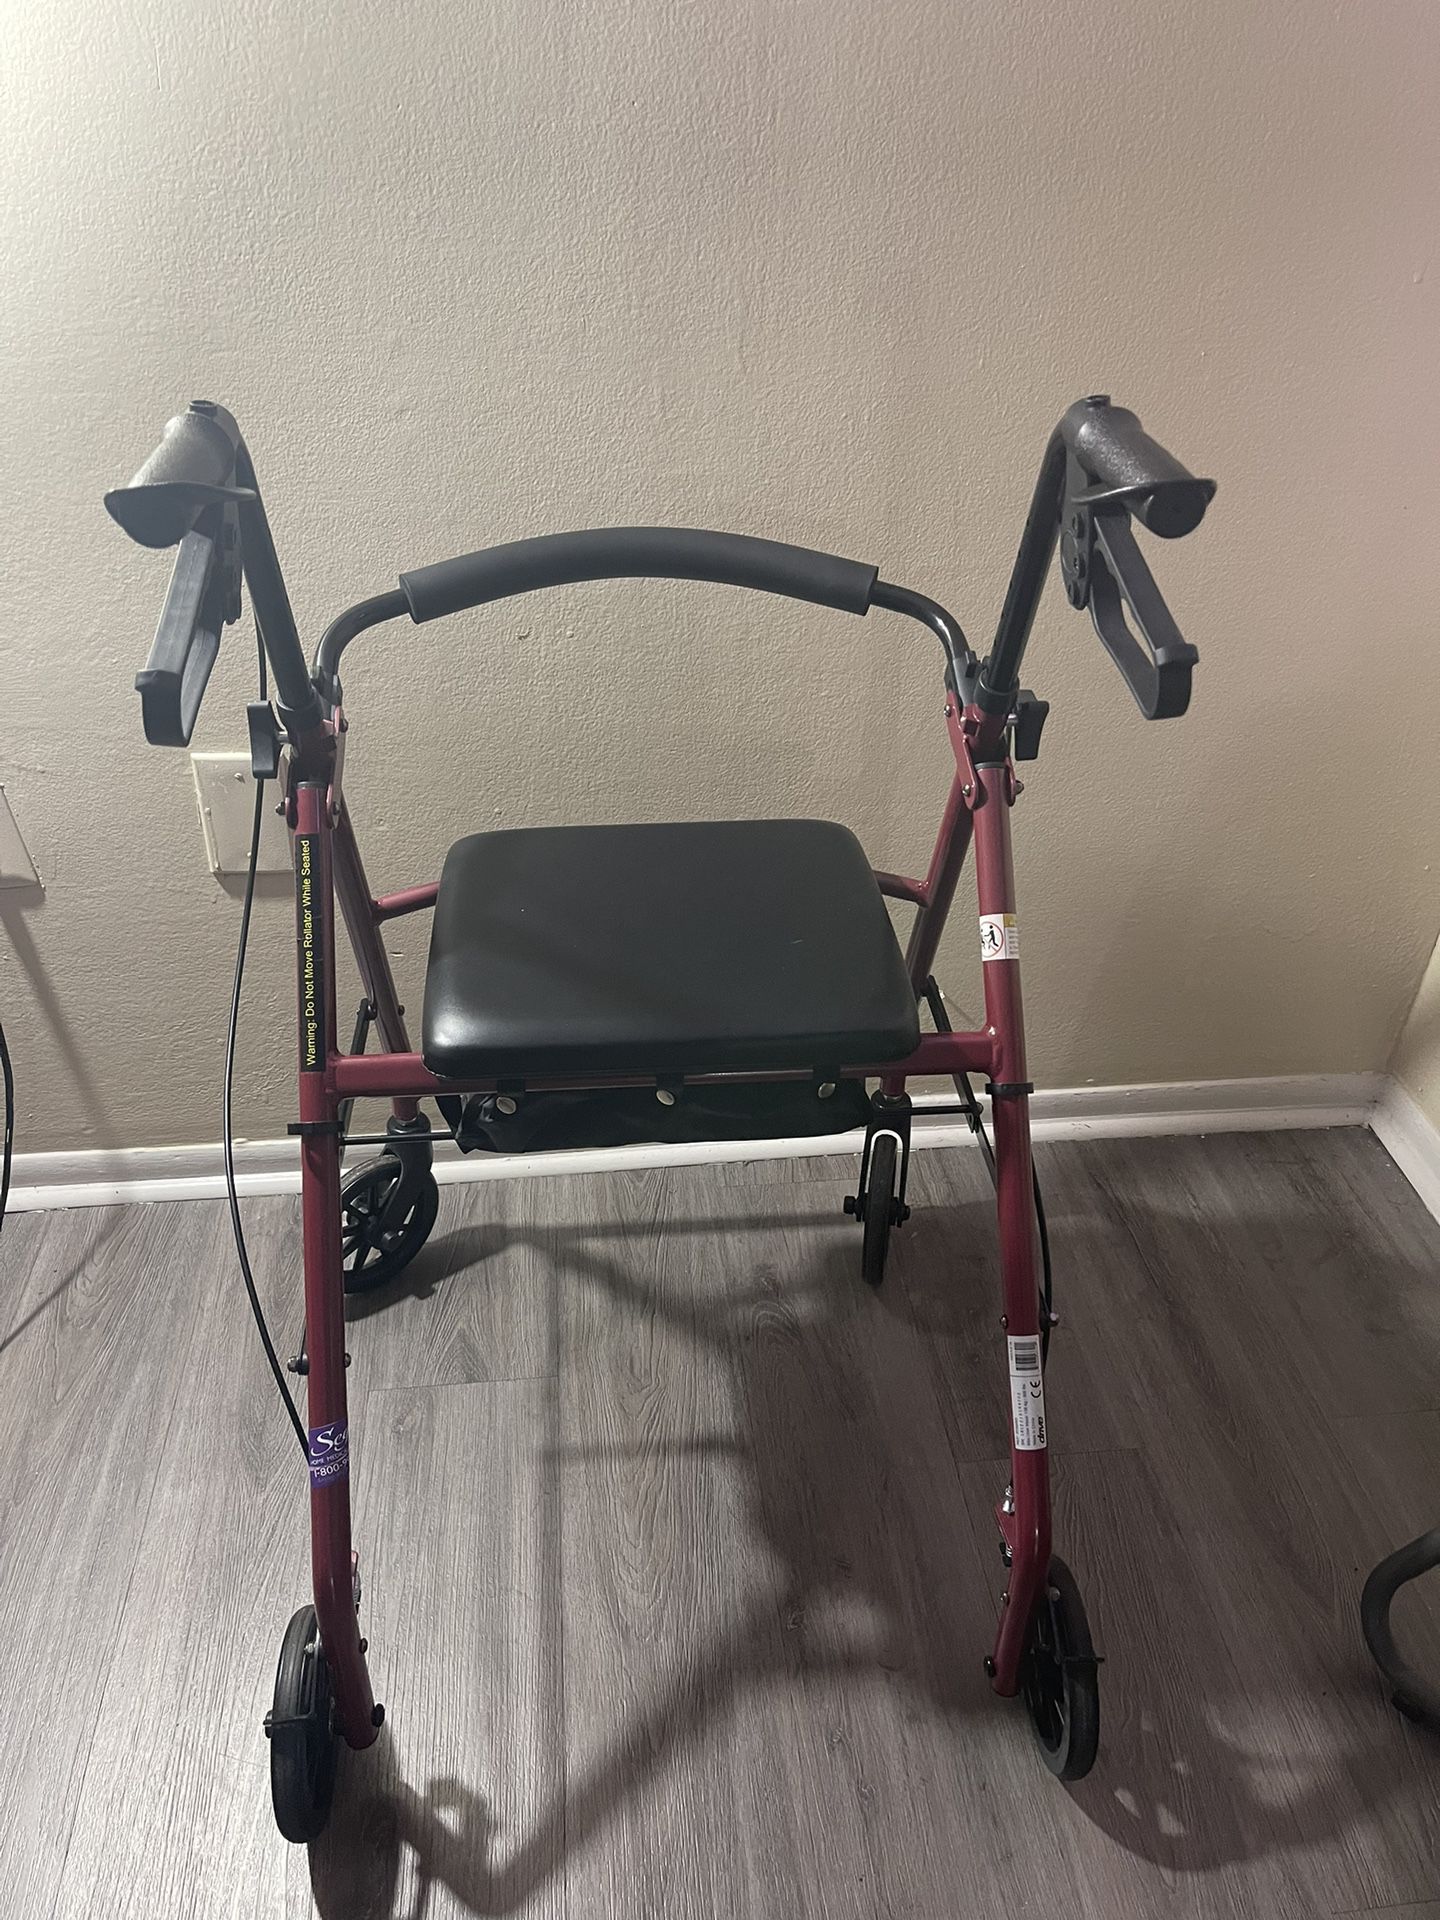 Walking Chair For Sale